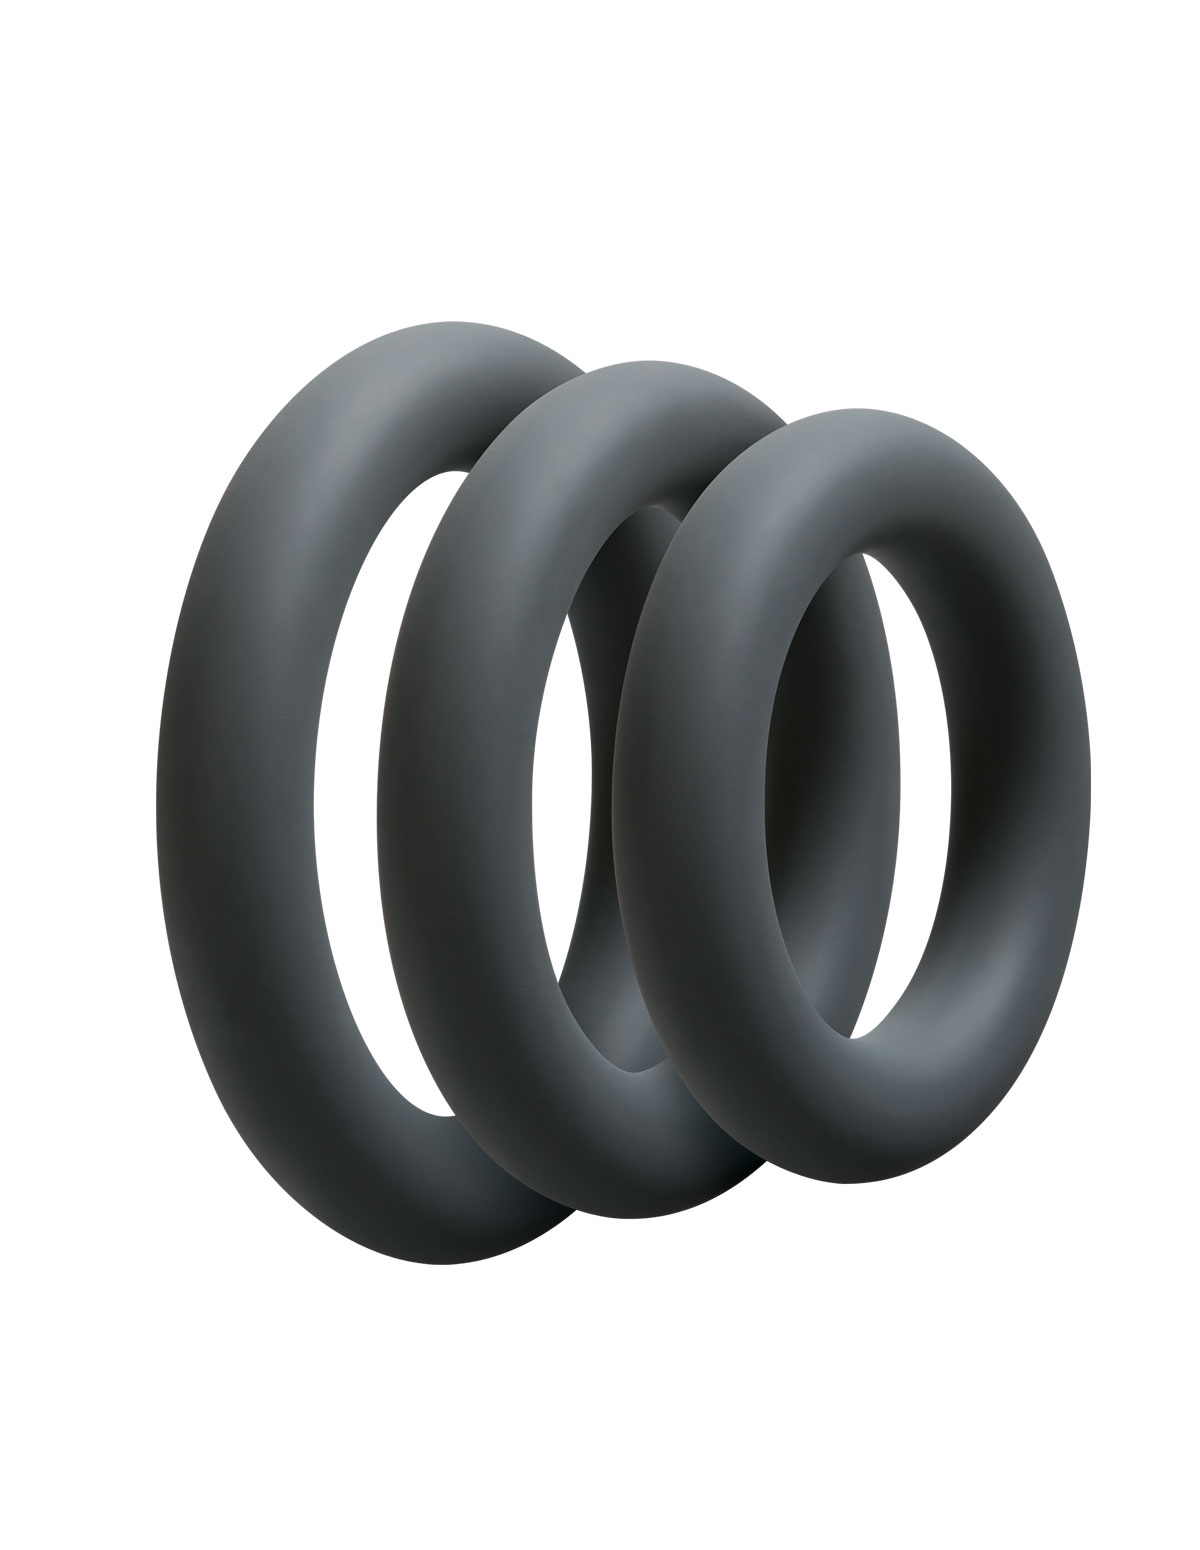 alternate image for Optimale 3 C-Ring Set- Thick Silicone